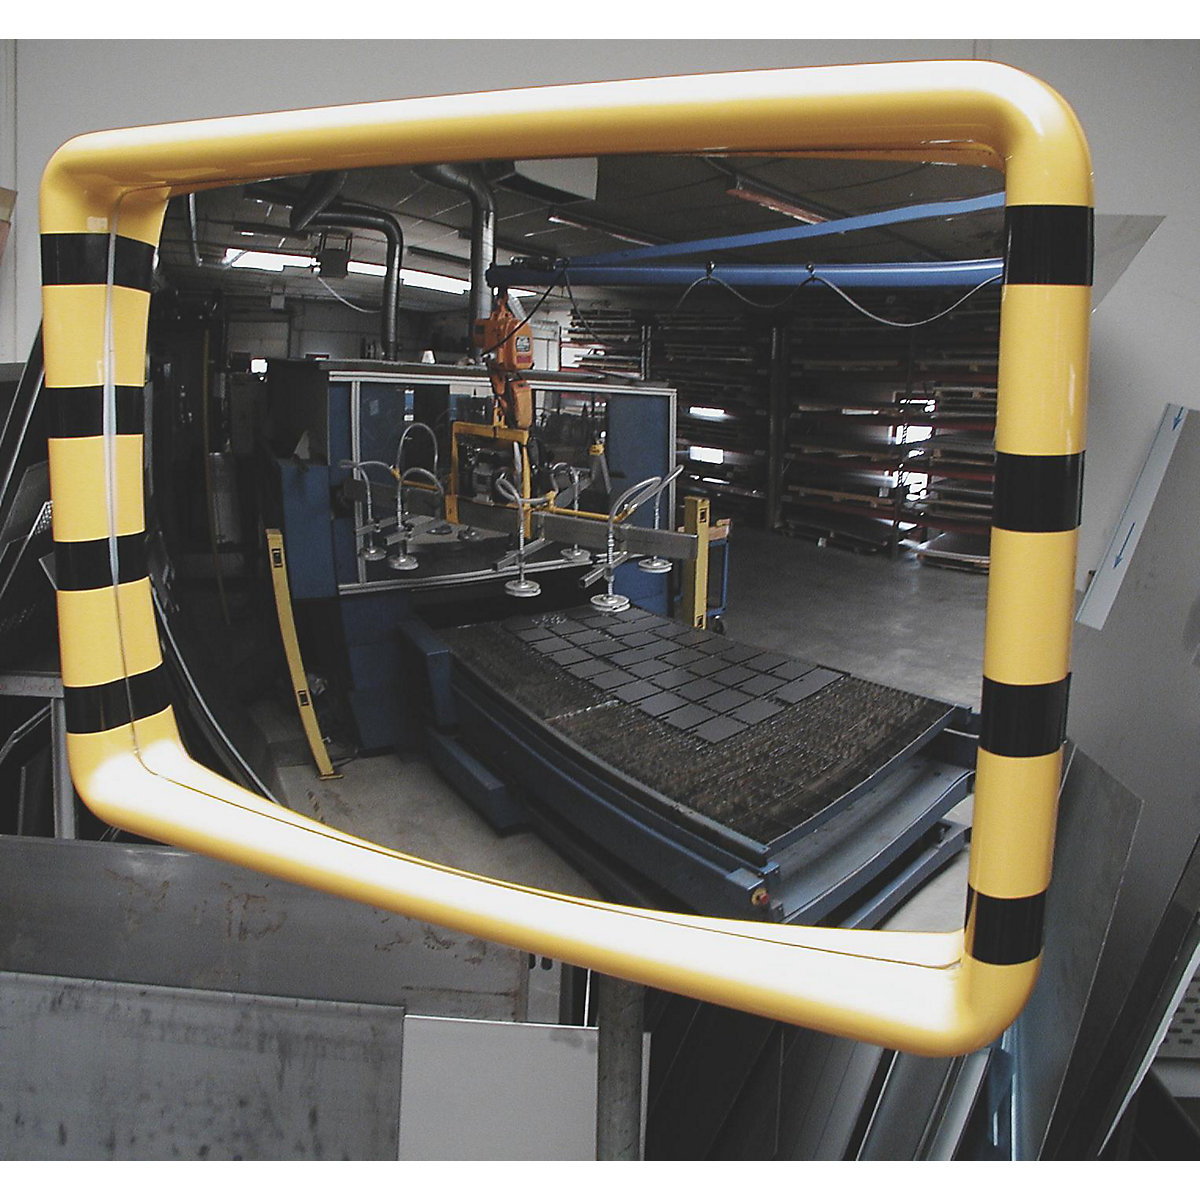 Observation mirror, frame with yellow/black warning stripes, WxH 600 x 400 mm-5